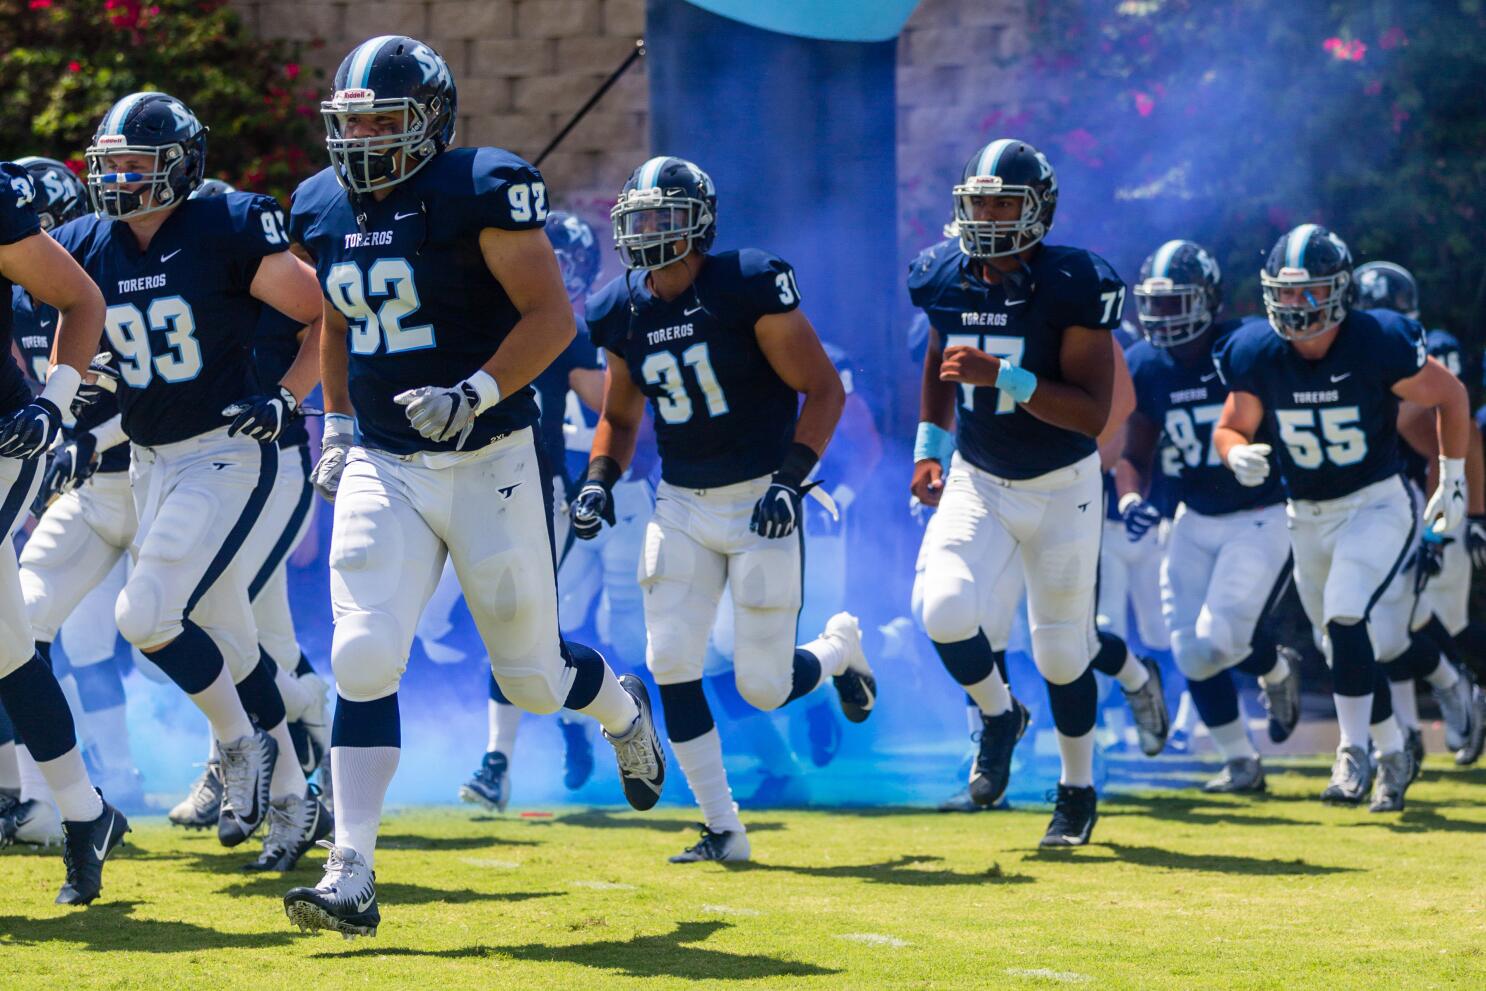 University of San Diego athletic director resigns while football team faces  hazing allegations – NBC 7 San Diego